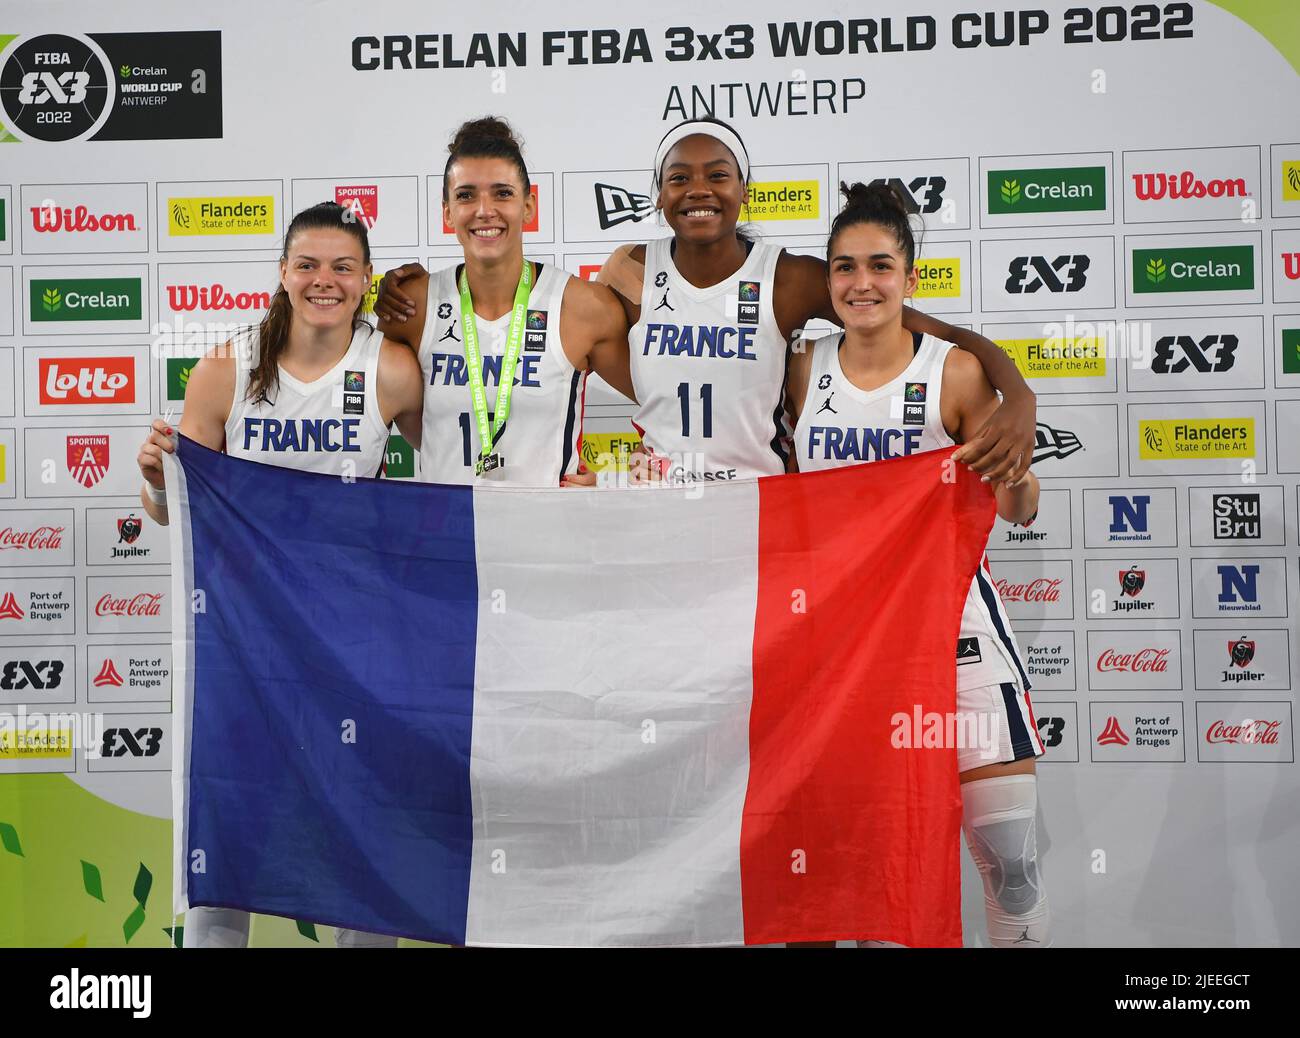 Antwerp, Belgium. 26th June, 2022. France's Marie-Eve Paget, Laetitia Guapo, Myriam Djekoundade and Hortense Limouzin (from L to R) pose after winning the FIBA 3X3 World Cup women's final match between France and Canada in Antwerp, Belgium, June 26, 2022. Credit: Ren Pengfei/Xinhua/Alamy Live News Stock Photo